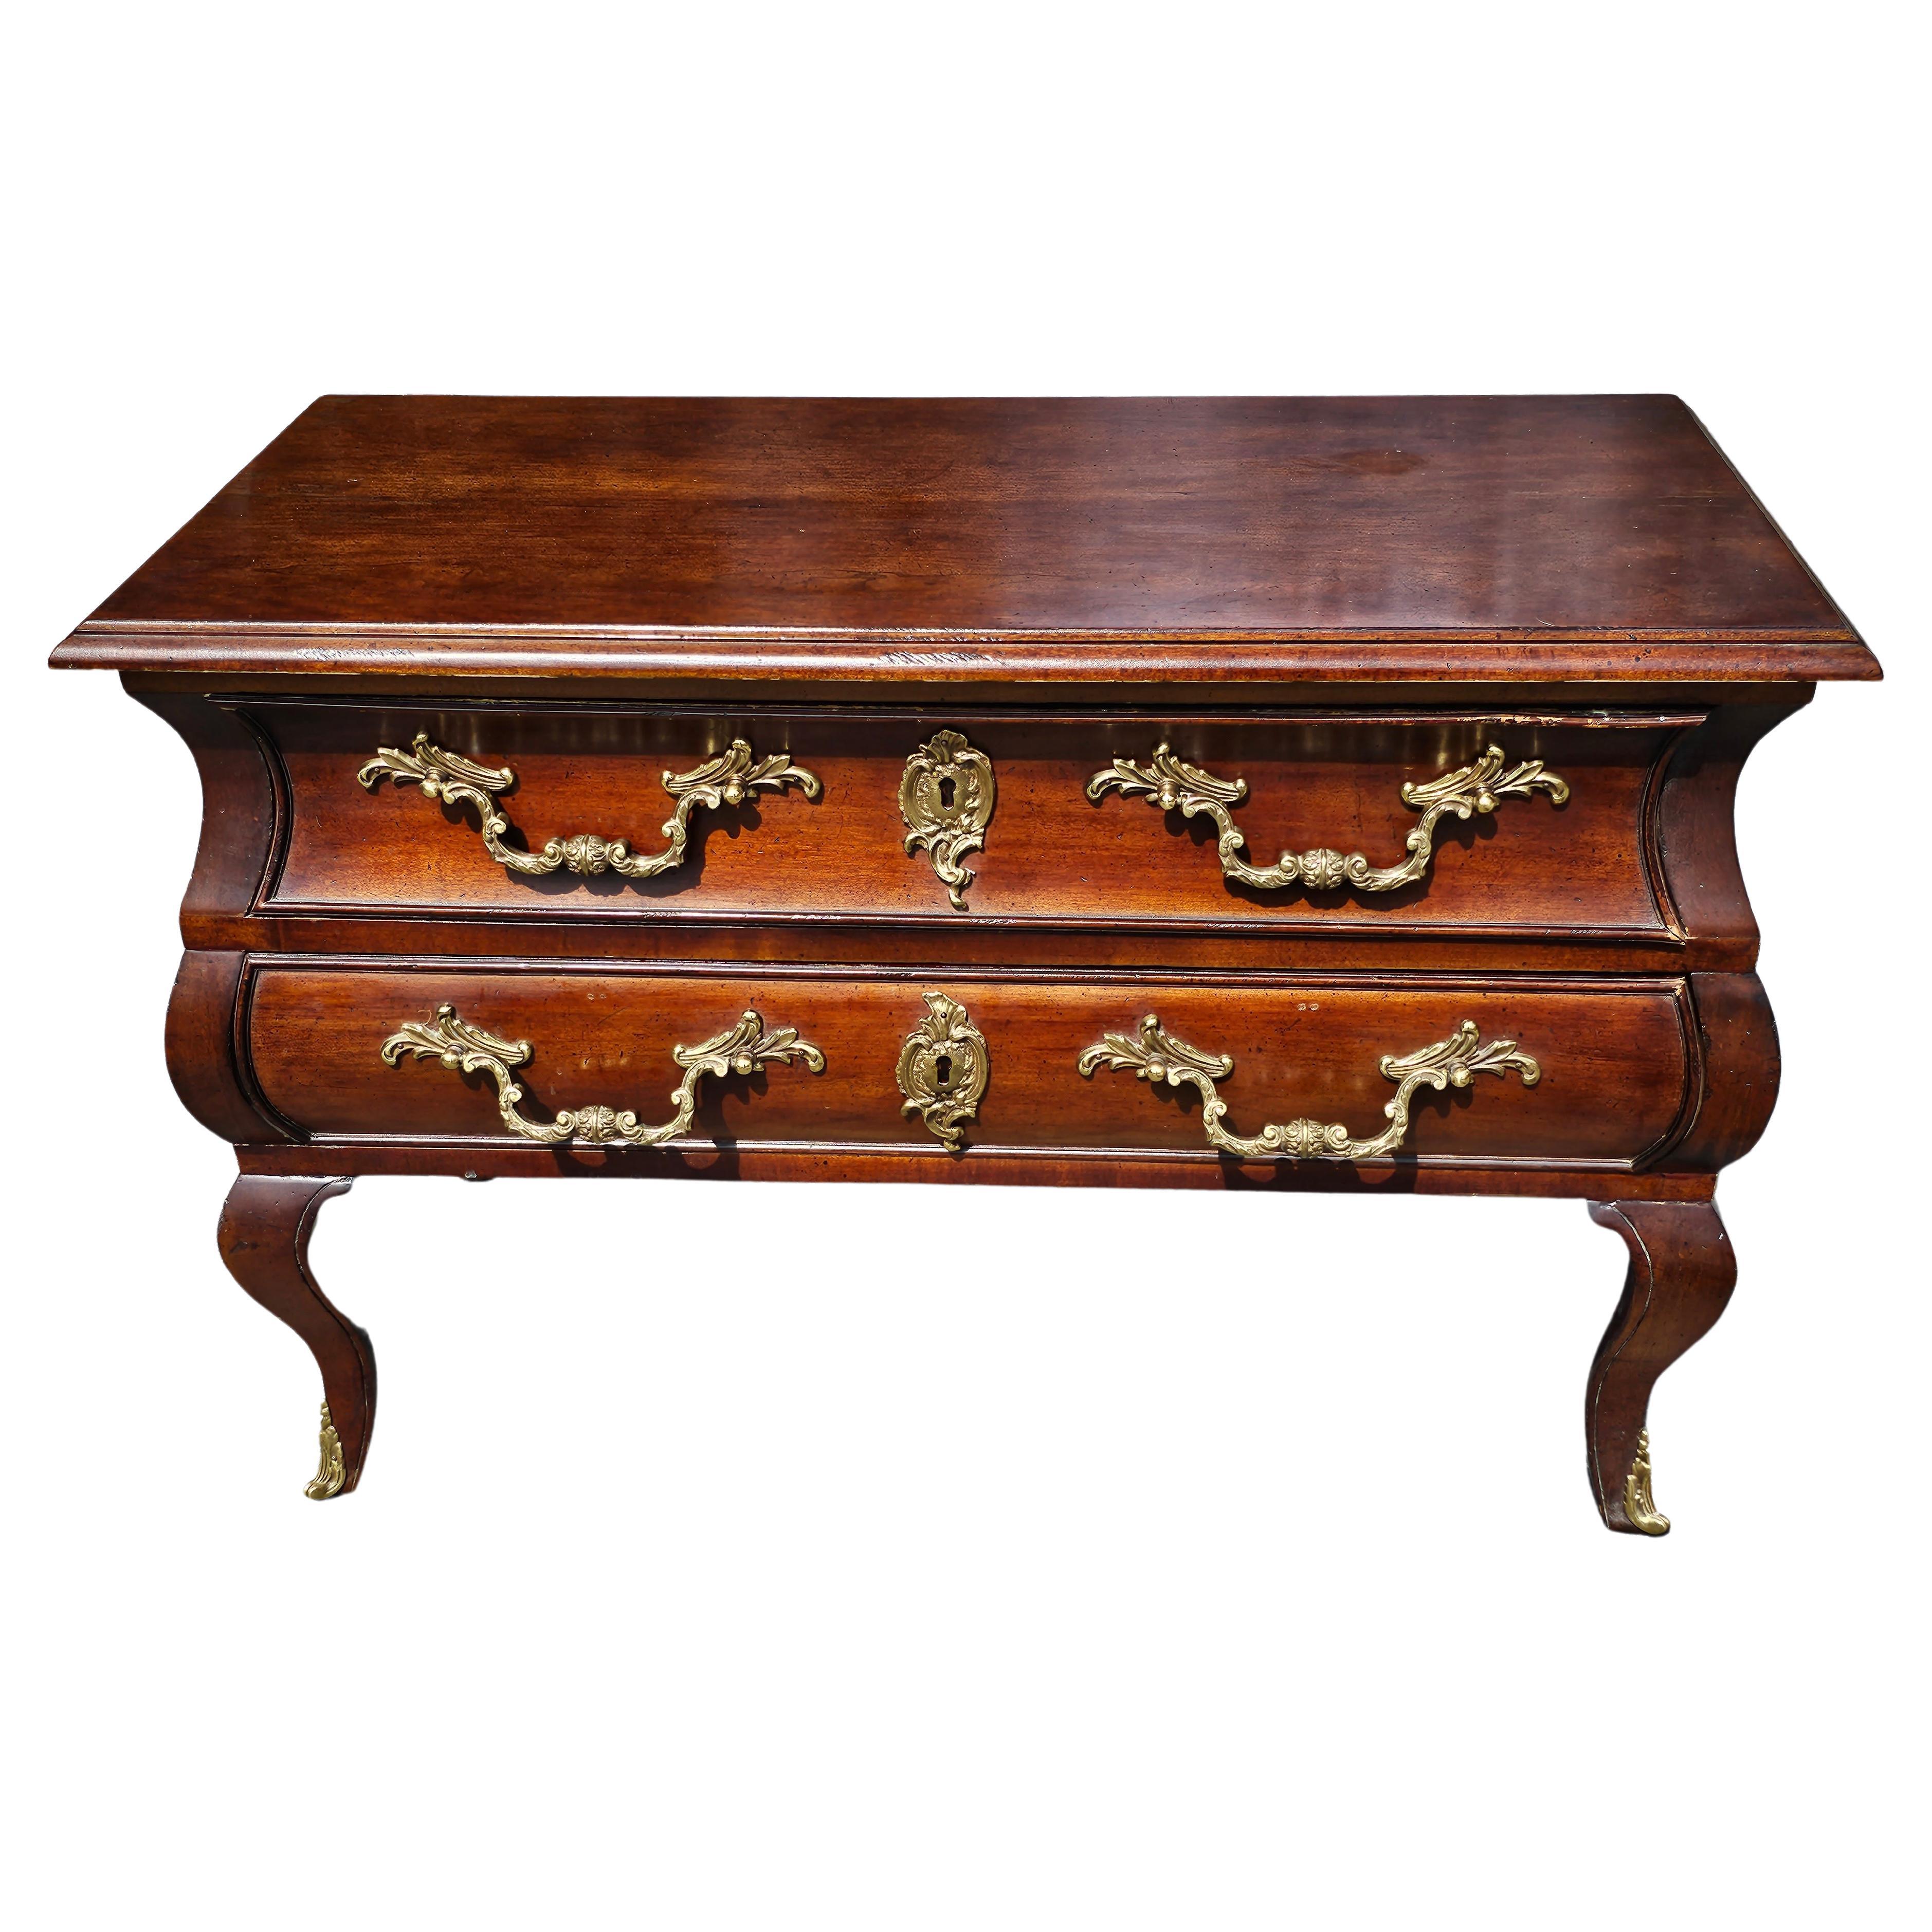 An exquisite two drawer French Neoclassical Style Mahogany Brass Mounted Low Chest  or Commode in goof vintage condition. Rare french handles and smooth drawers. Measures 33